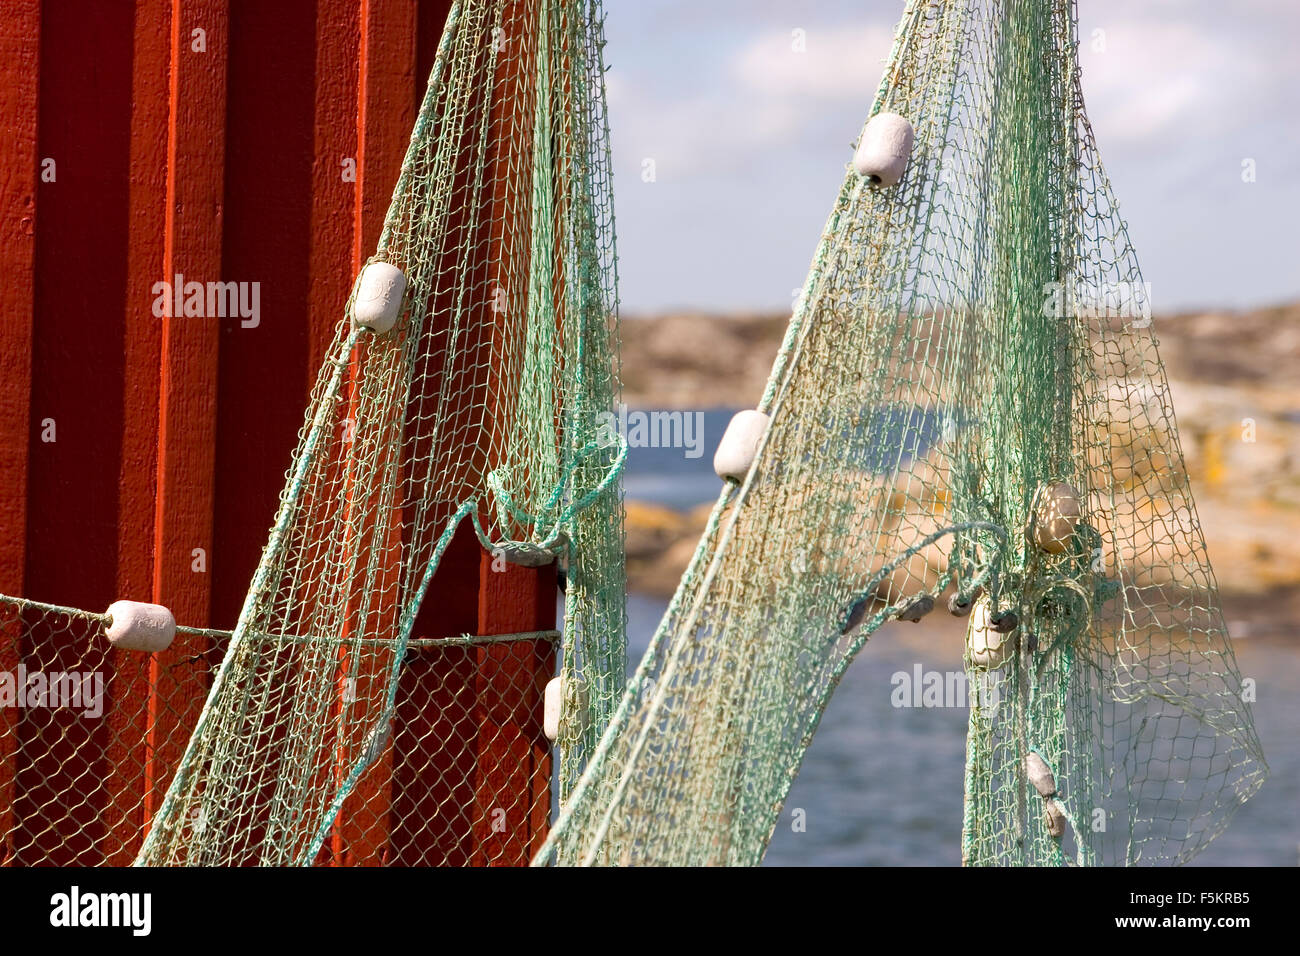 Collapsed Secured Fishing Nets Port Texture Stock Photo 1145382137